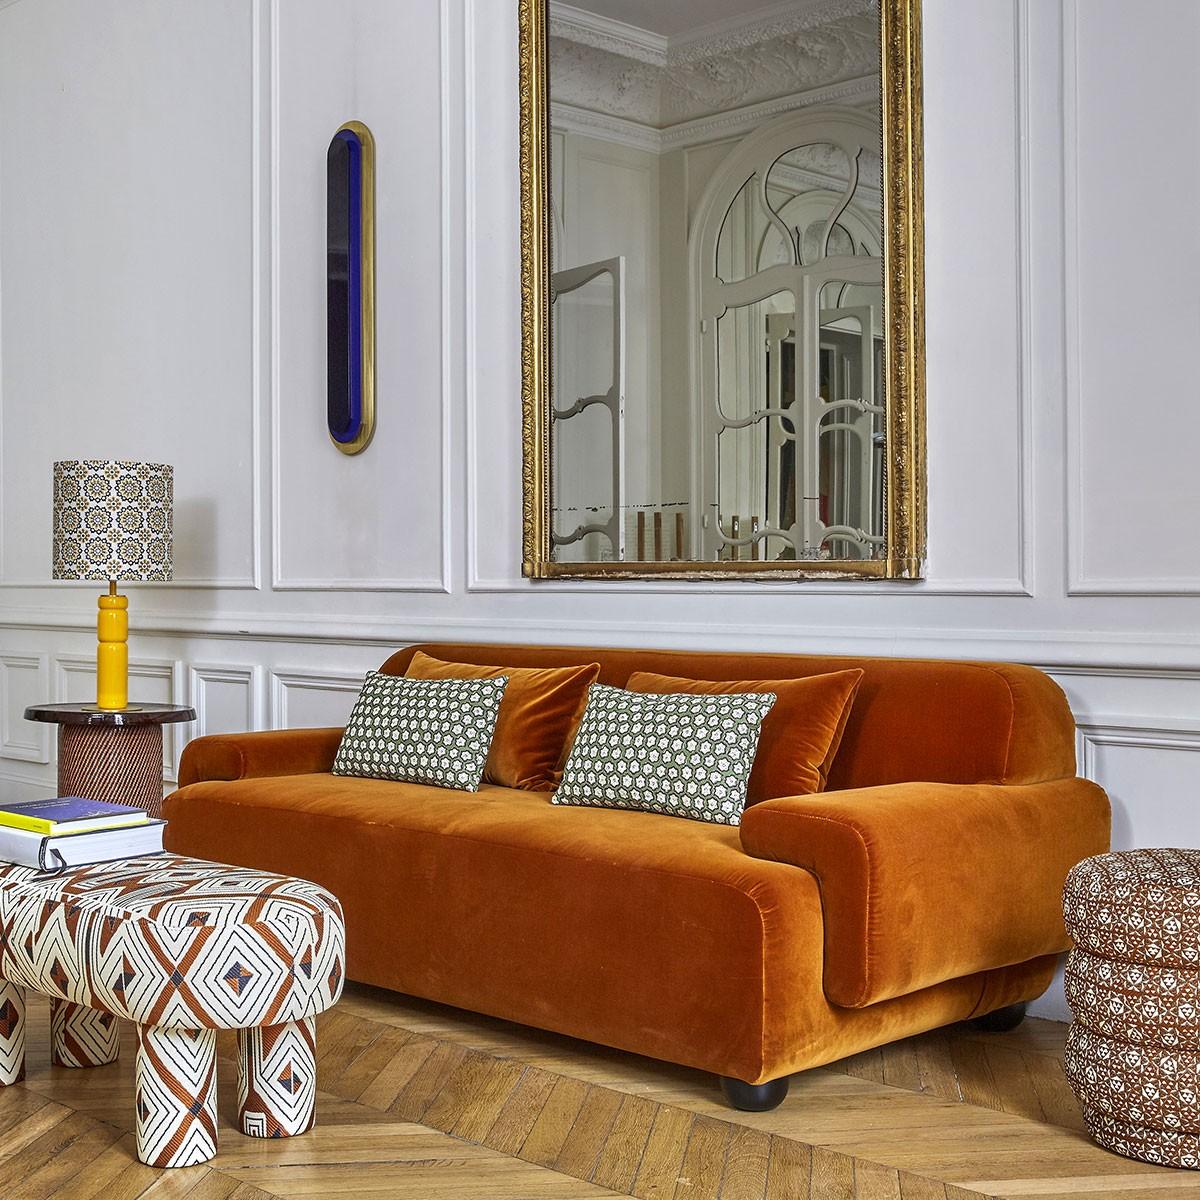 Popus Editions Lena 3 seater sofa in orange verone velvet upholstery

It looks like it's straight out of a movie, with its generous curves and wide armrests. It is a real invitation to spend long Sundays with the family, comfortably seated in